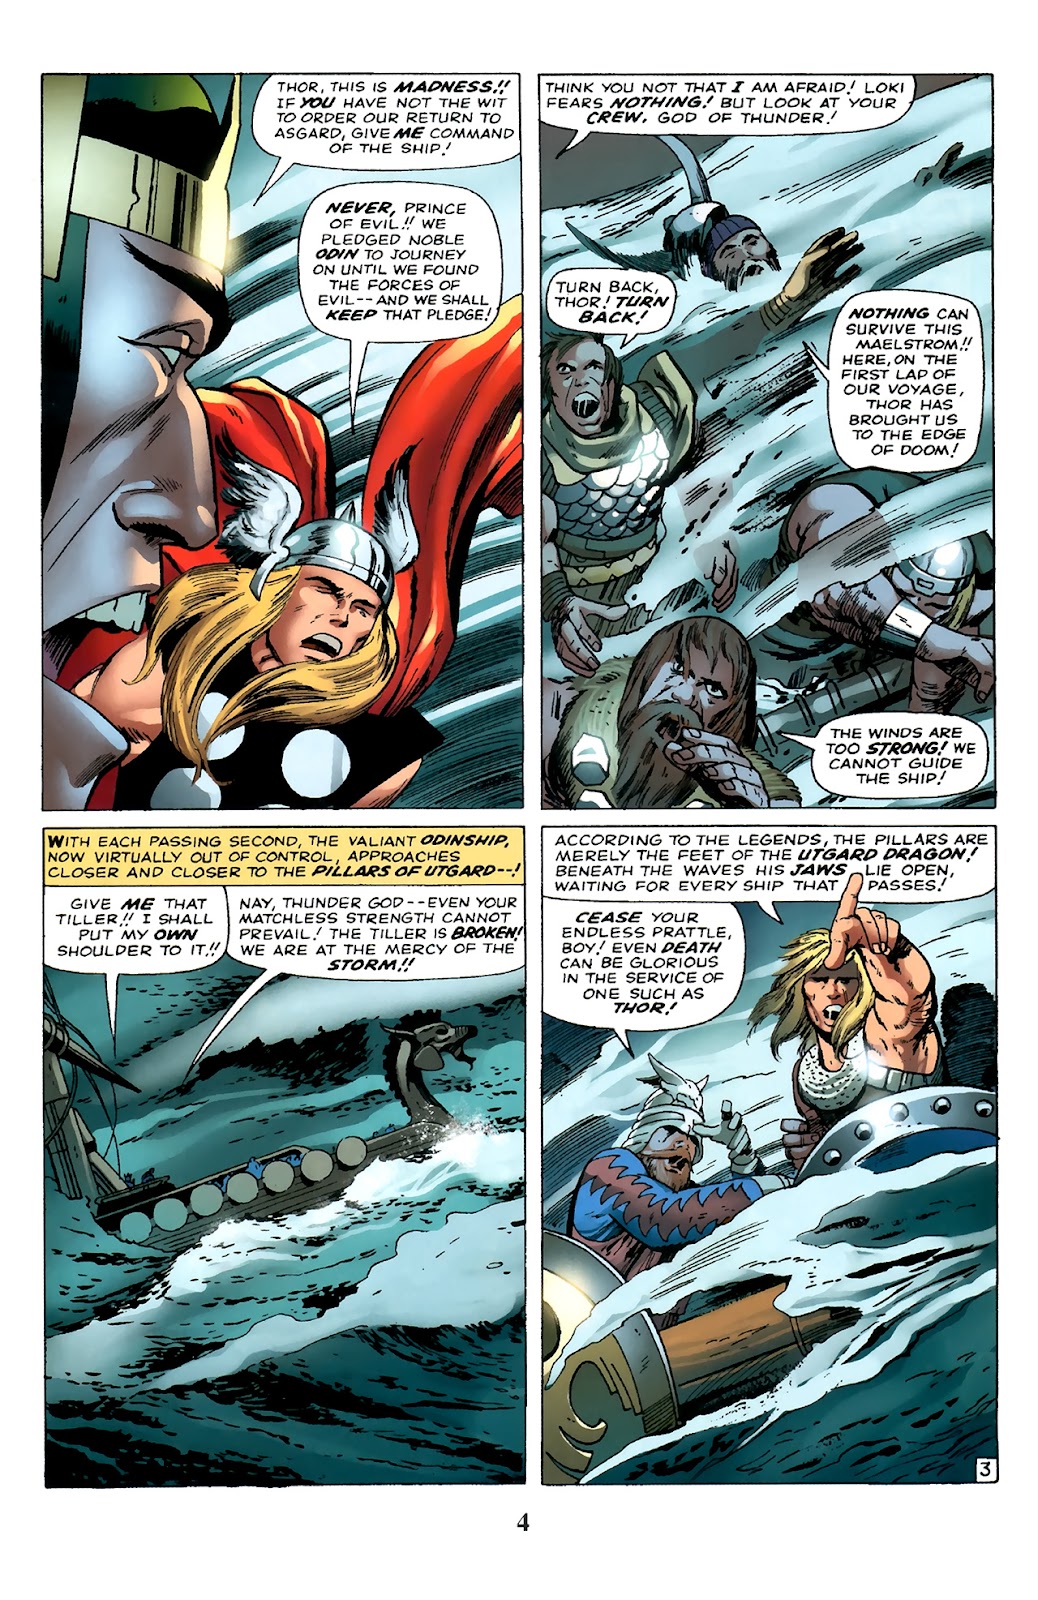 Thor: Tales of Asgard by Stan Lee & Jack Kirby issue 4 - Page 6